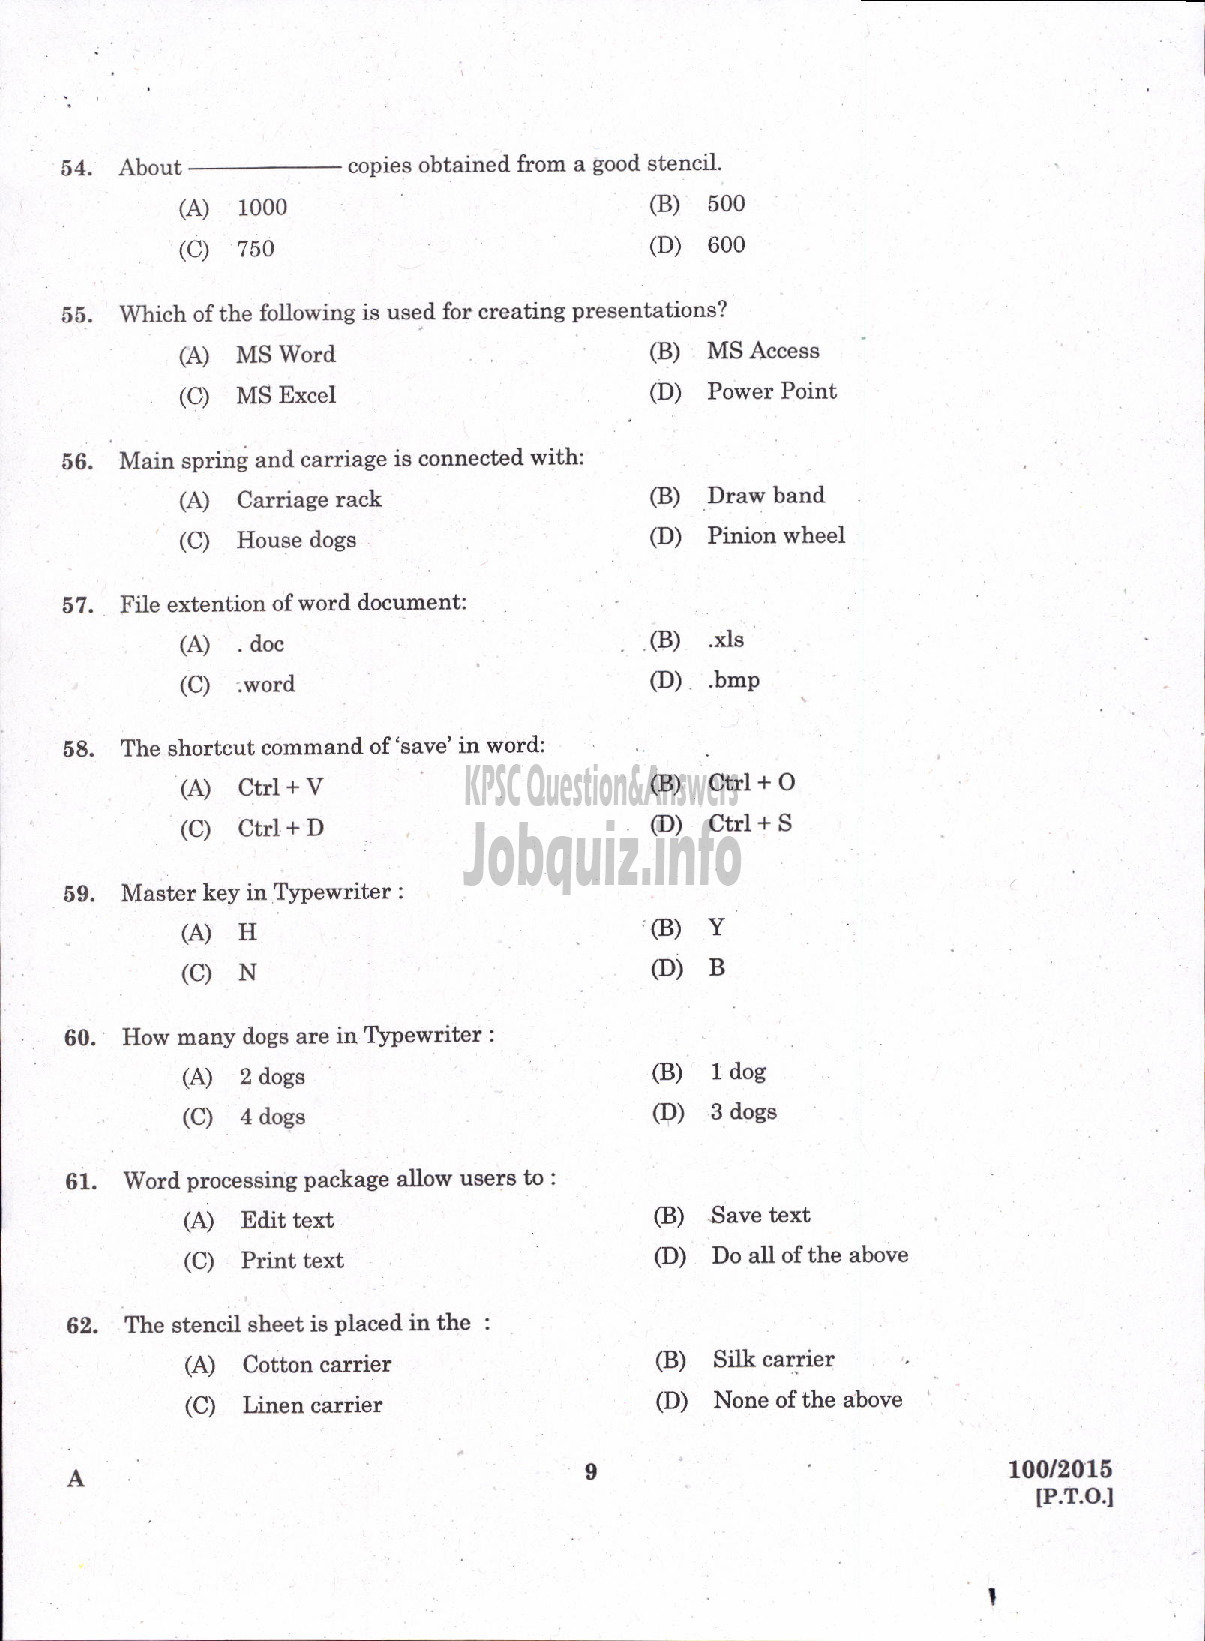 Kerala PSC Question Paper - TYYPIST GRADE II / STENO TYPIST / CLERK TYPIST / TYPIST KERALA STATE HOUSING BOARD / KERALA SHIPPING AND INLAND NAVIGATION CORP LTD / VARIOUS / KERALA ELECTRICAL AND ALLIED ENGINEERING COMPANY LTD-7